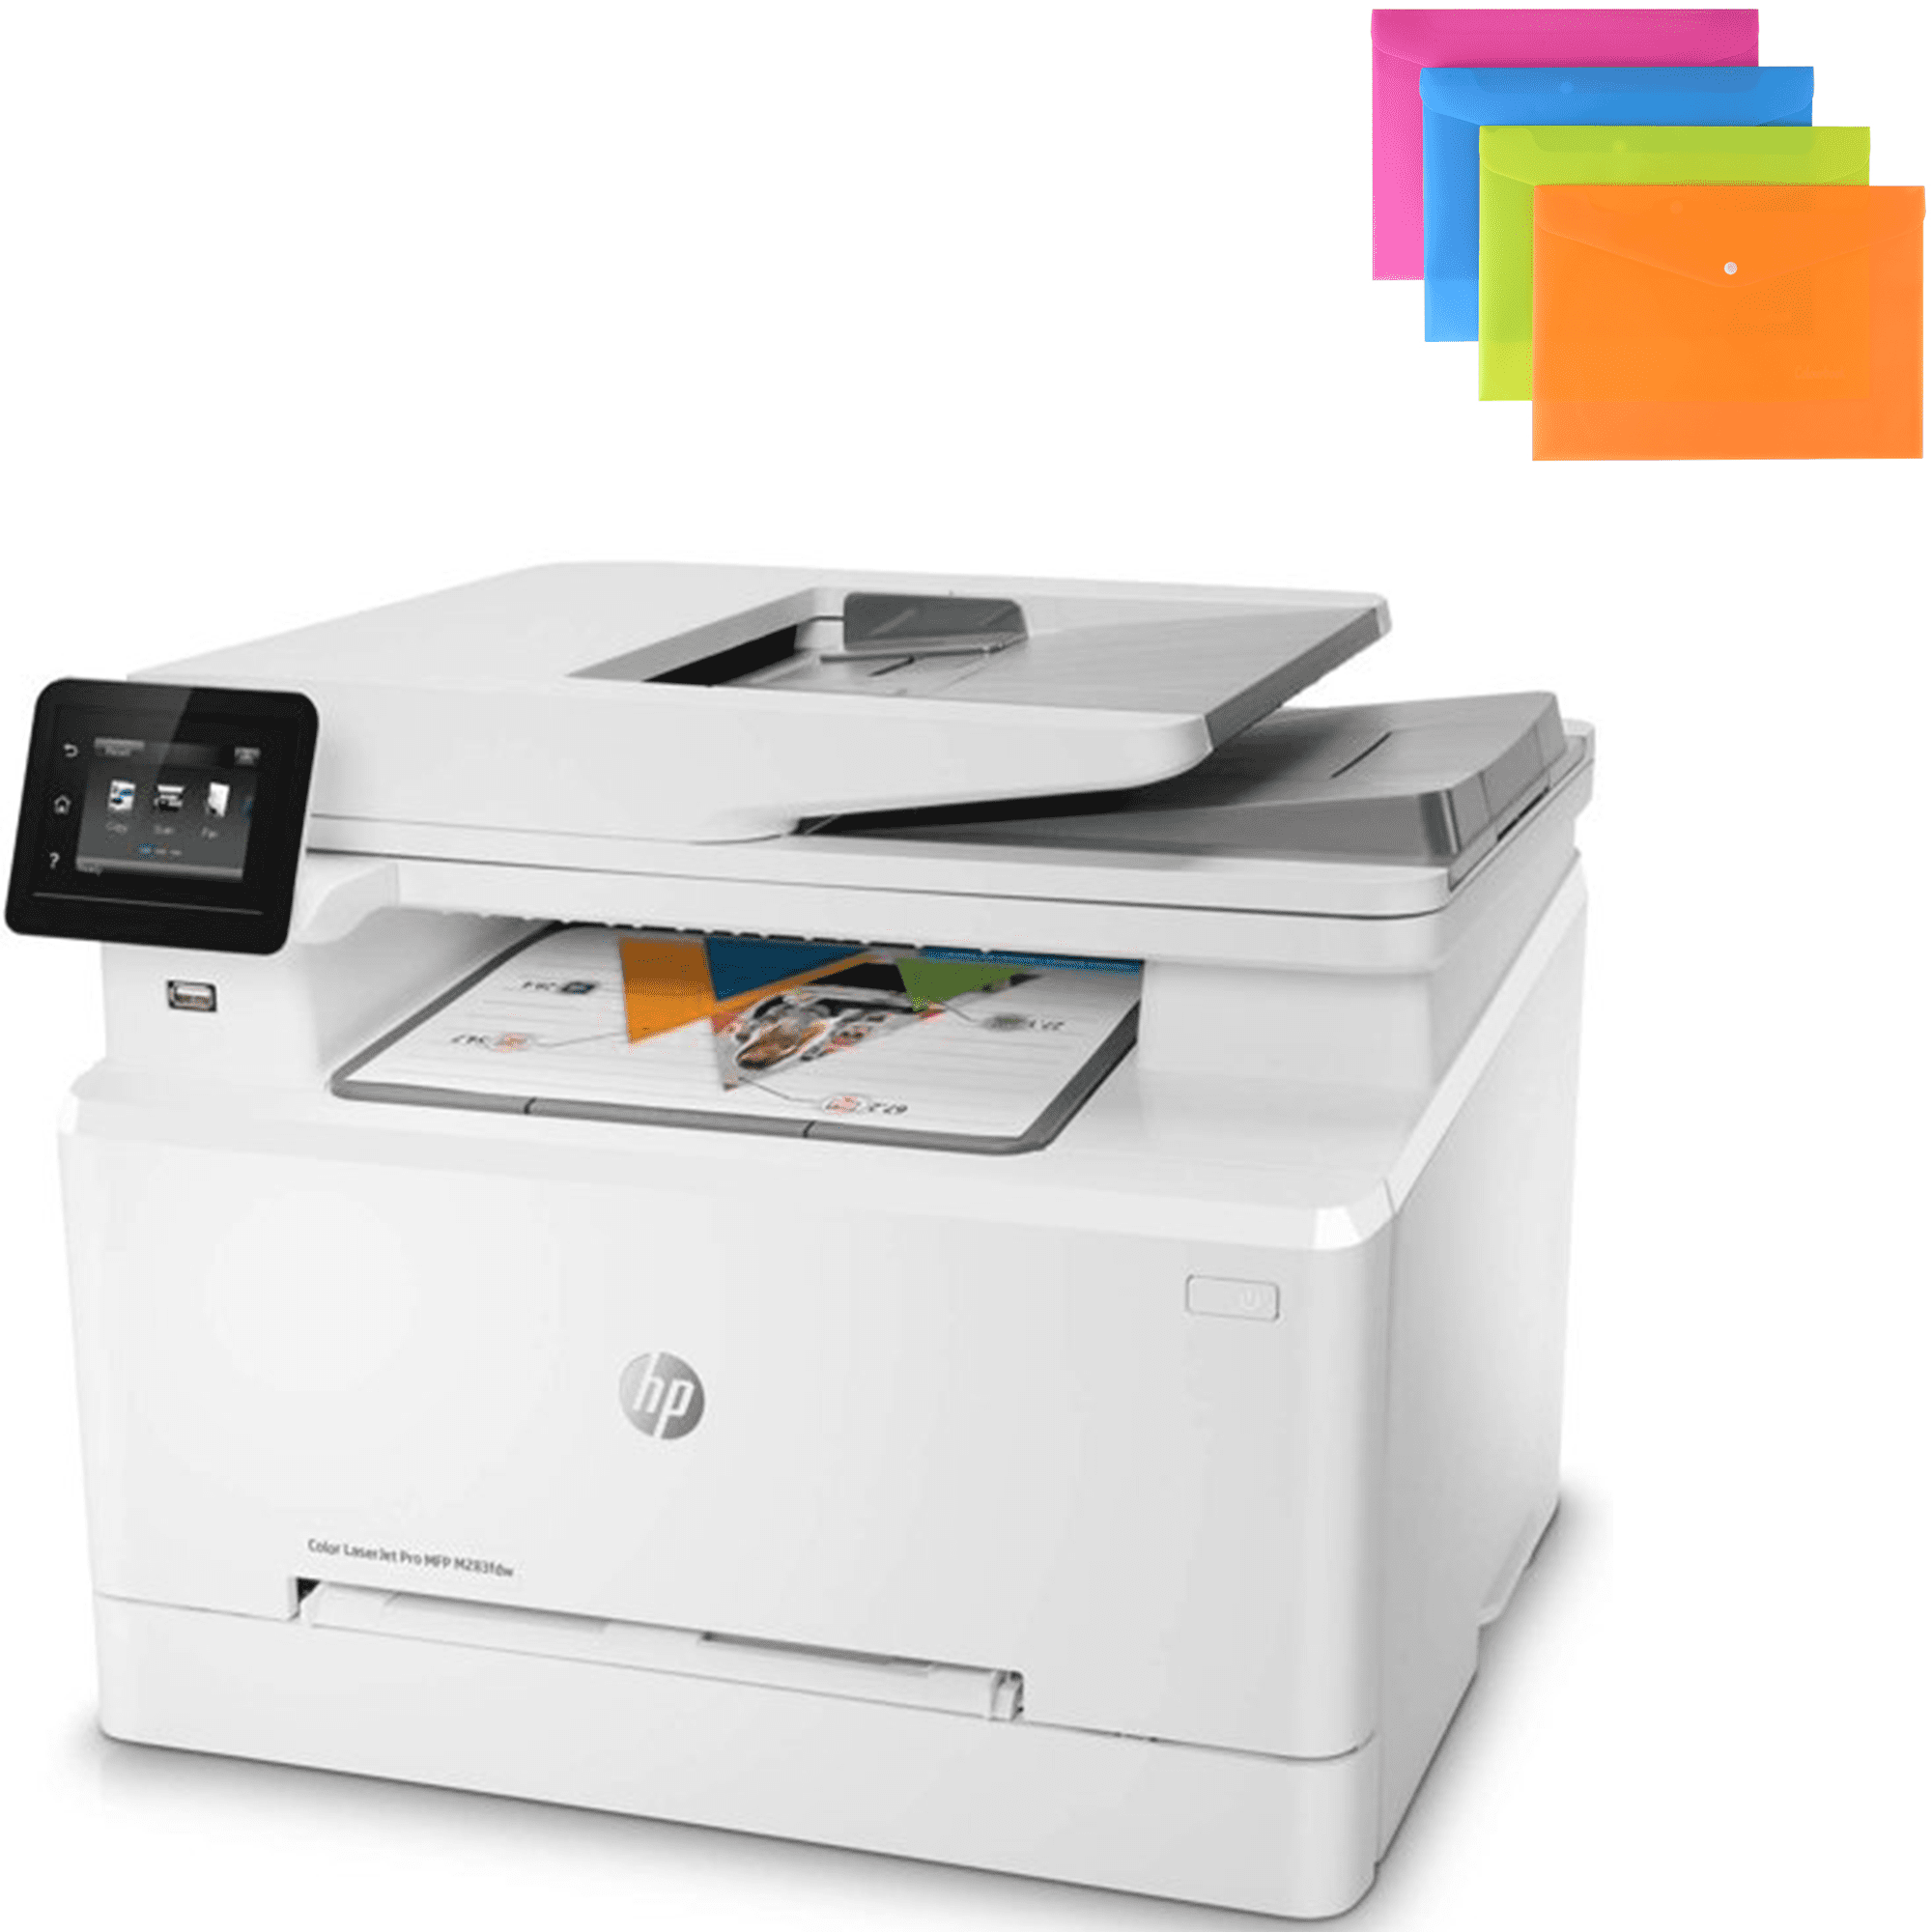 H-P Laserjet Pro MFP M283fdw All-in-One Wireless Color Laser Printer, Print  Scan Copy Fax, 22 ppm, 600x600 dpi, 8.5x14, Auto 2-Sided Printing, Work